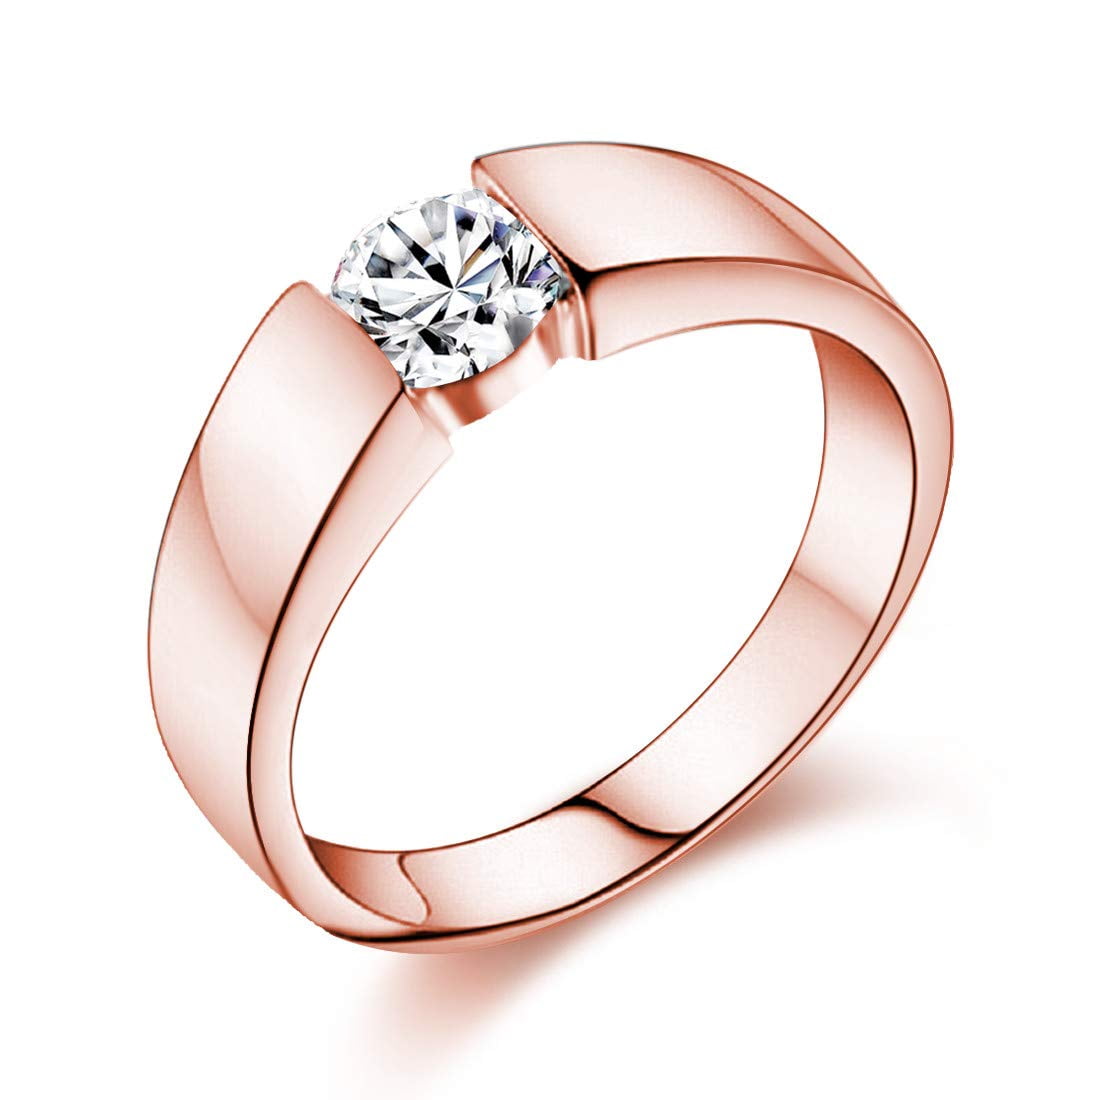 Details about   Women's Anniversary Solitaire Rings 9mm Round Cut Diamond 925 Sterling Silver 